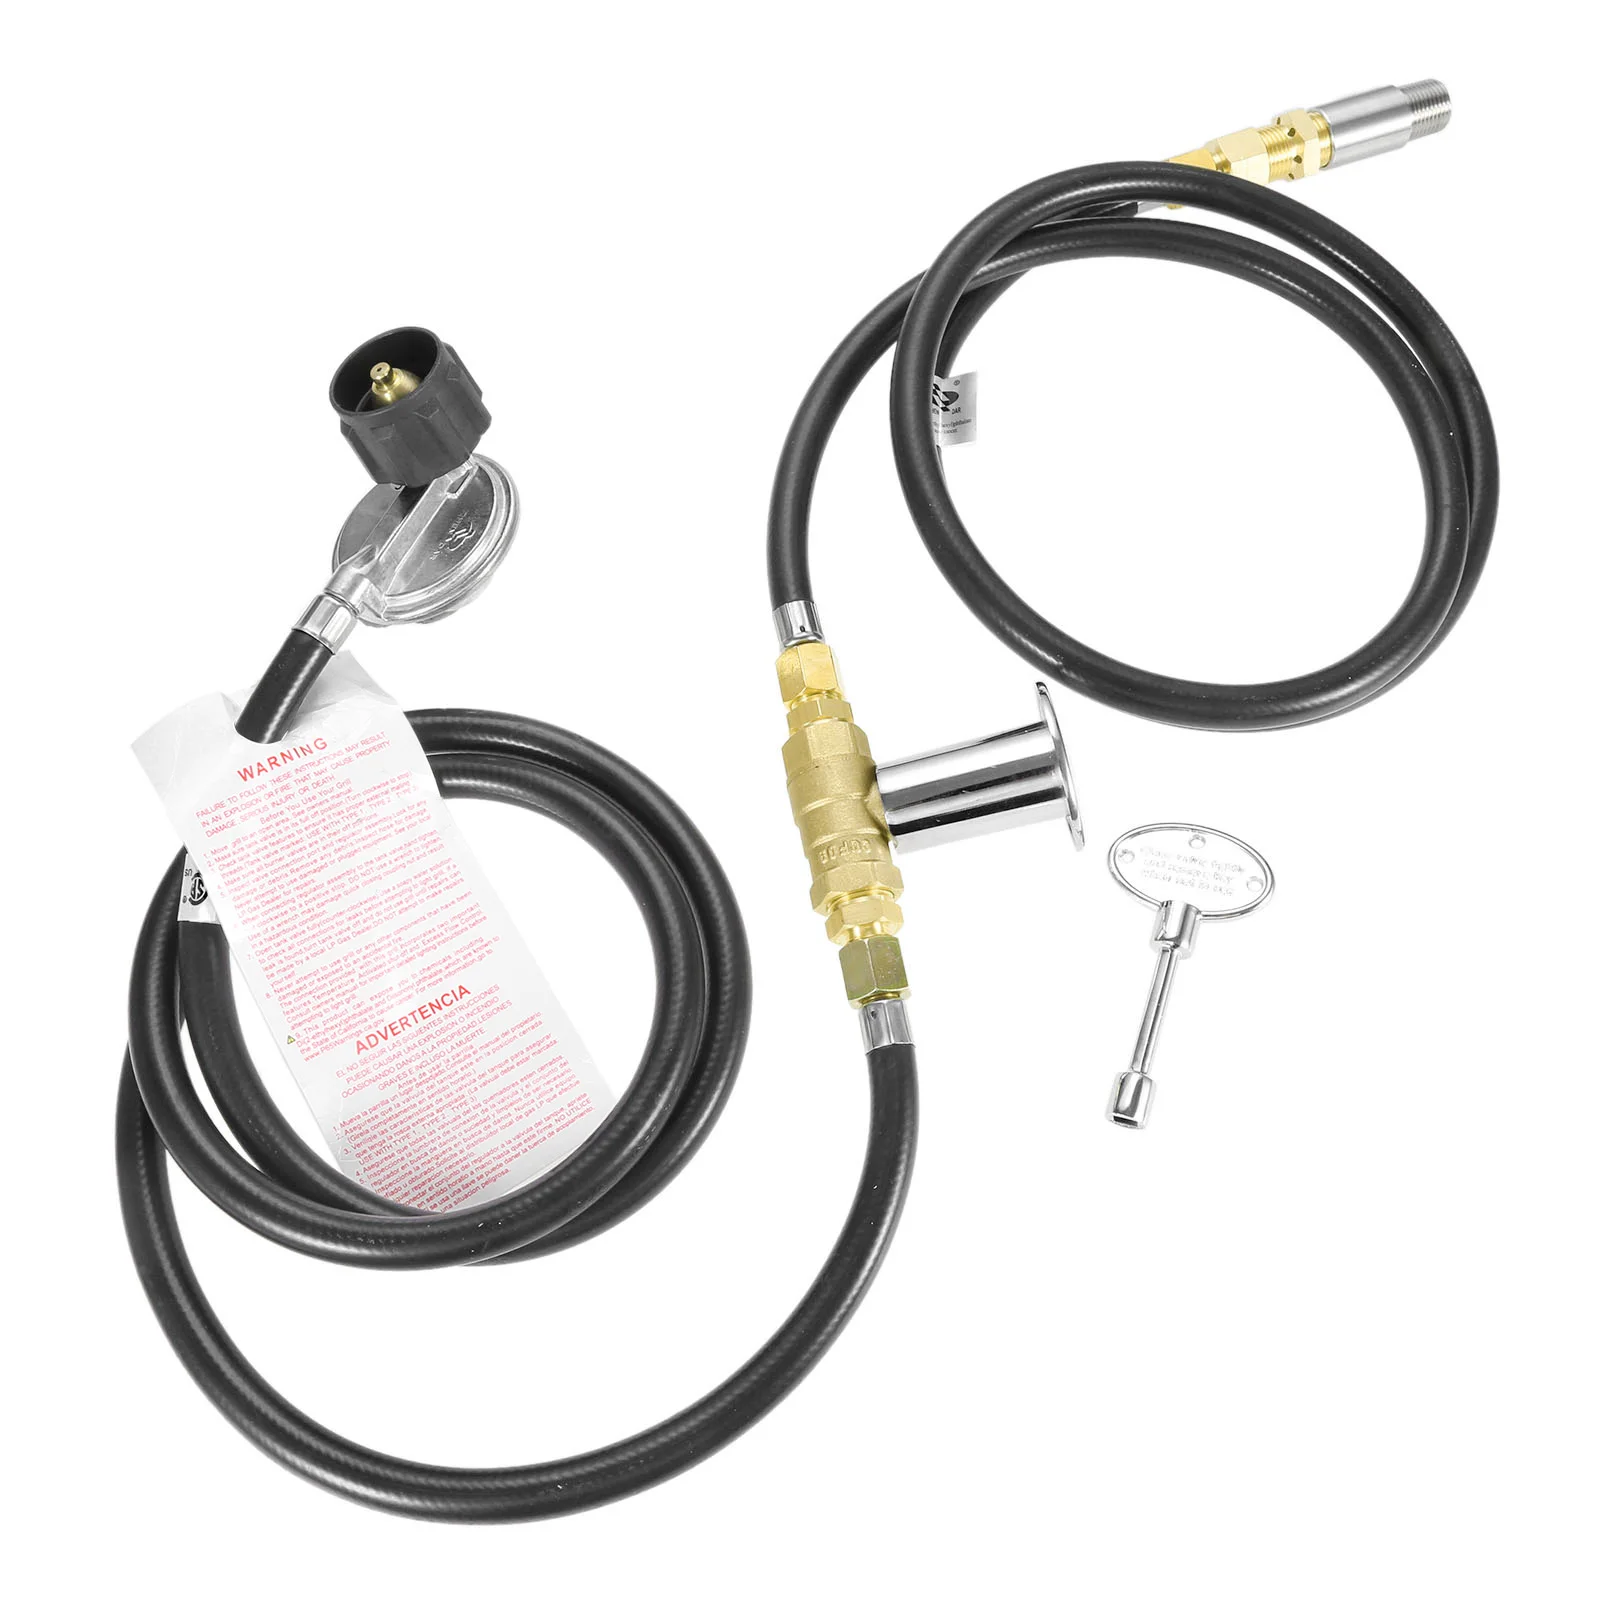 Propane Gas Fire Pit Valve Control System Kit Hose Assembly Parts for BTU Less Than 150,000 With Low Pressure Propane System